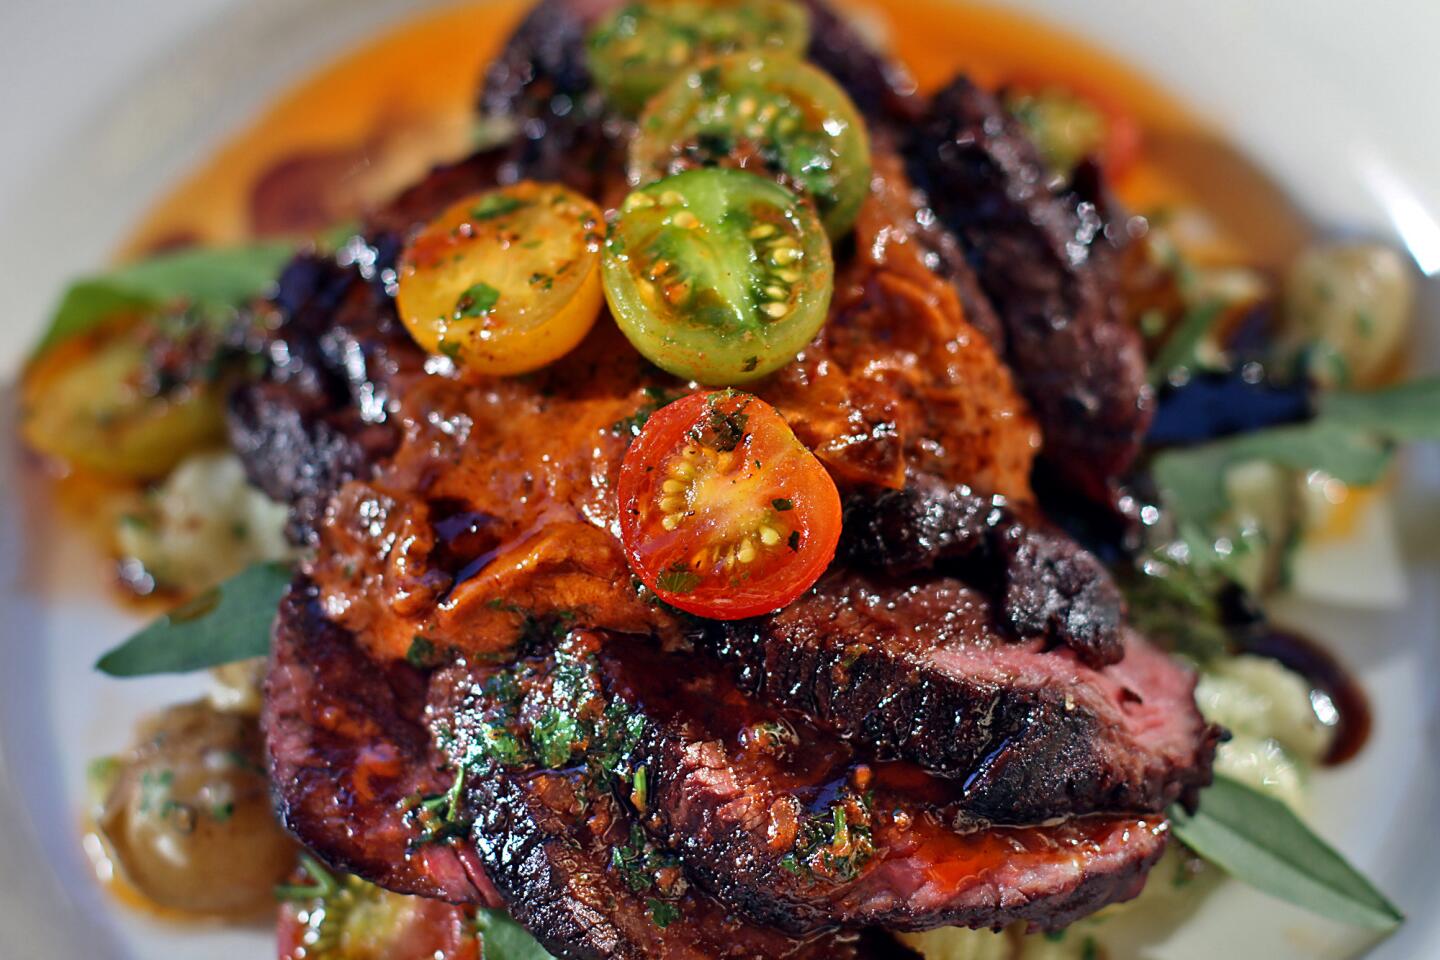 Hanger steak with cherry tomatoes at Lucques.